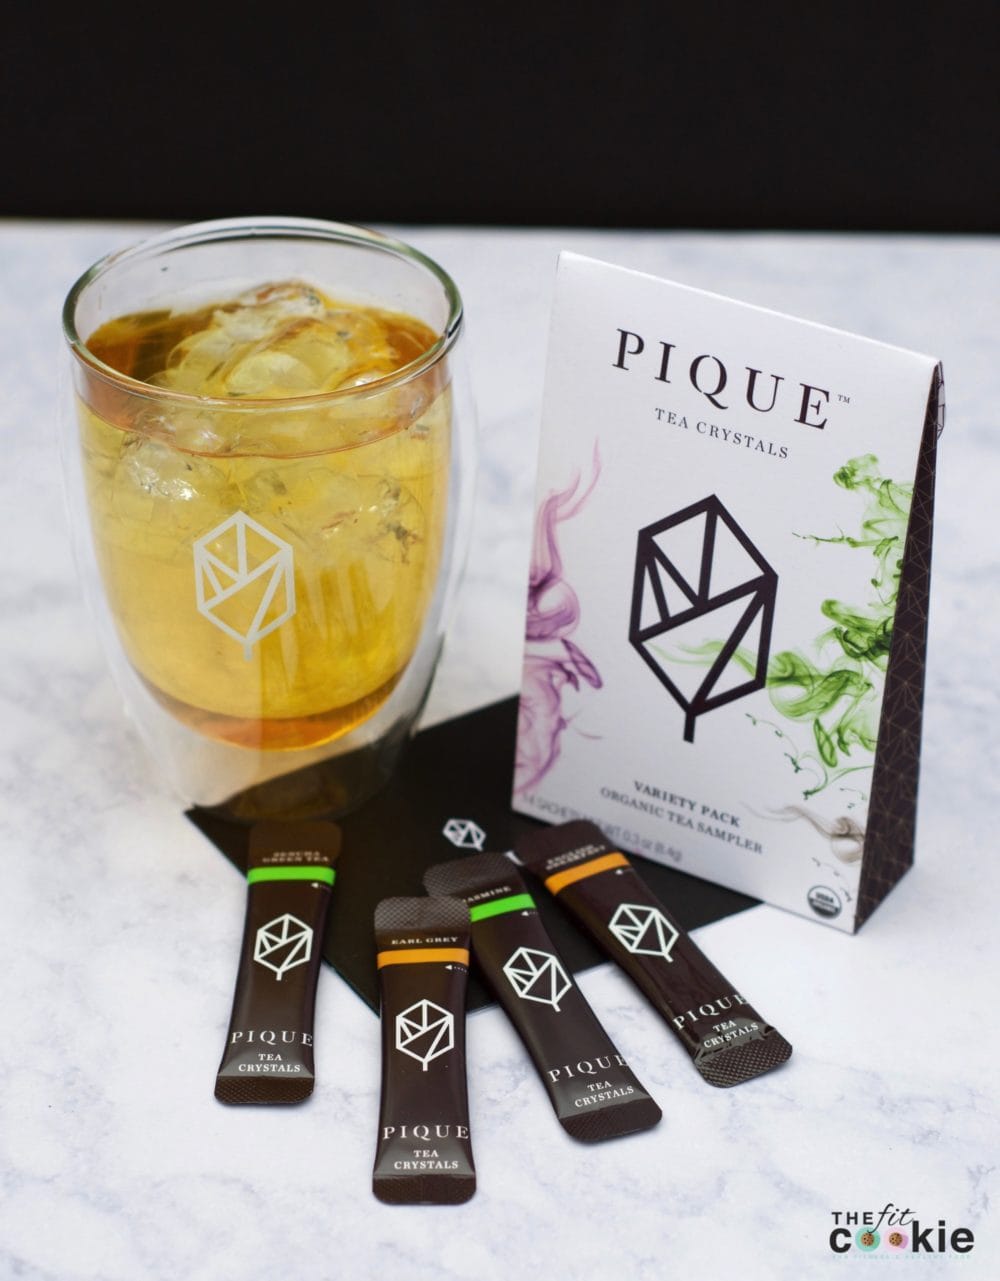 Here are some of the great health benefits of tea, along with a delicious dairy free iced Earl Gray Latte (aka London Fog)! - #ad @thefitcookie @pique_tea #tea #health #wellness 